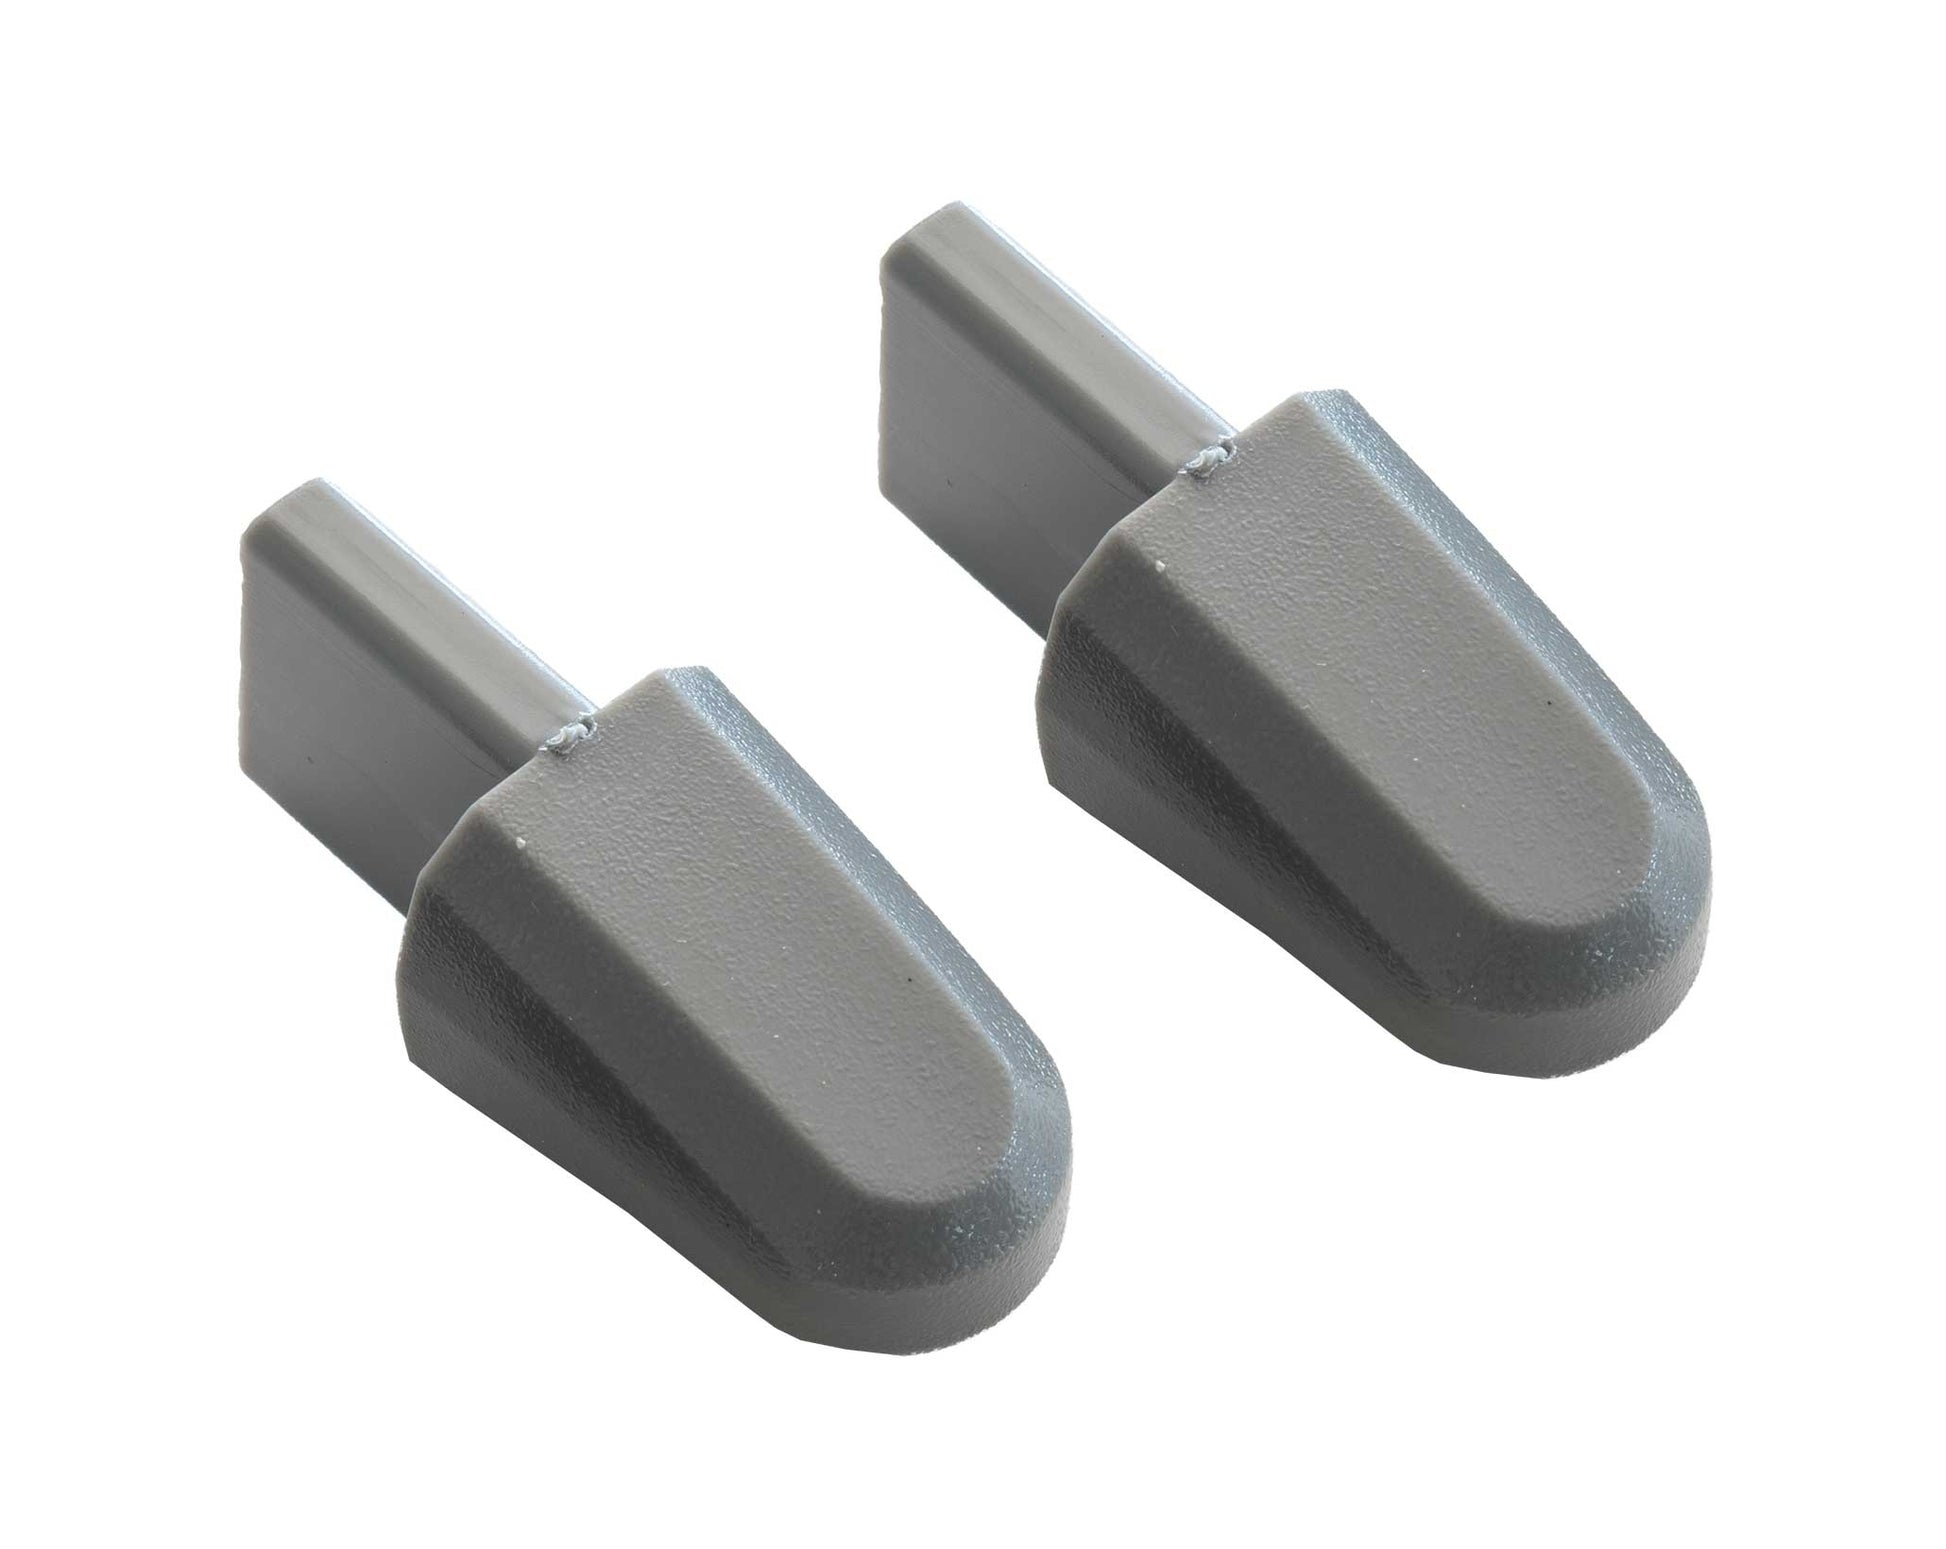 2005-2014 Ford Mustang Seat Release Lever Tilt Latch Knobs Handles Gray - Pair